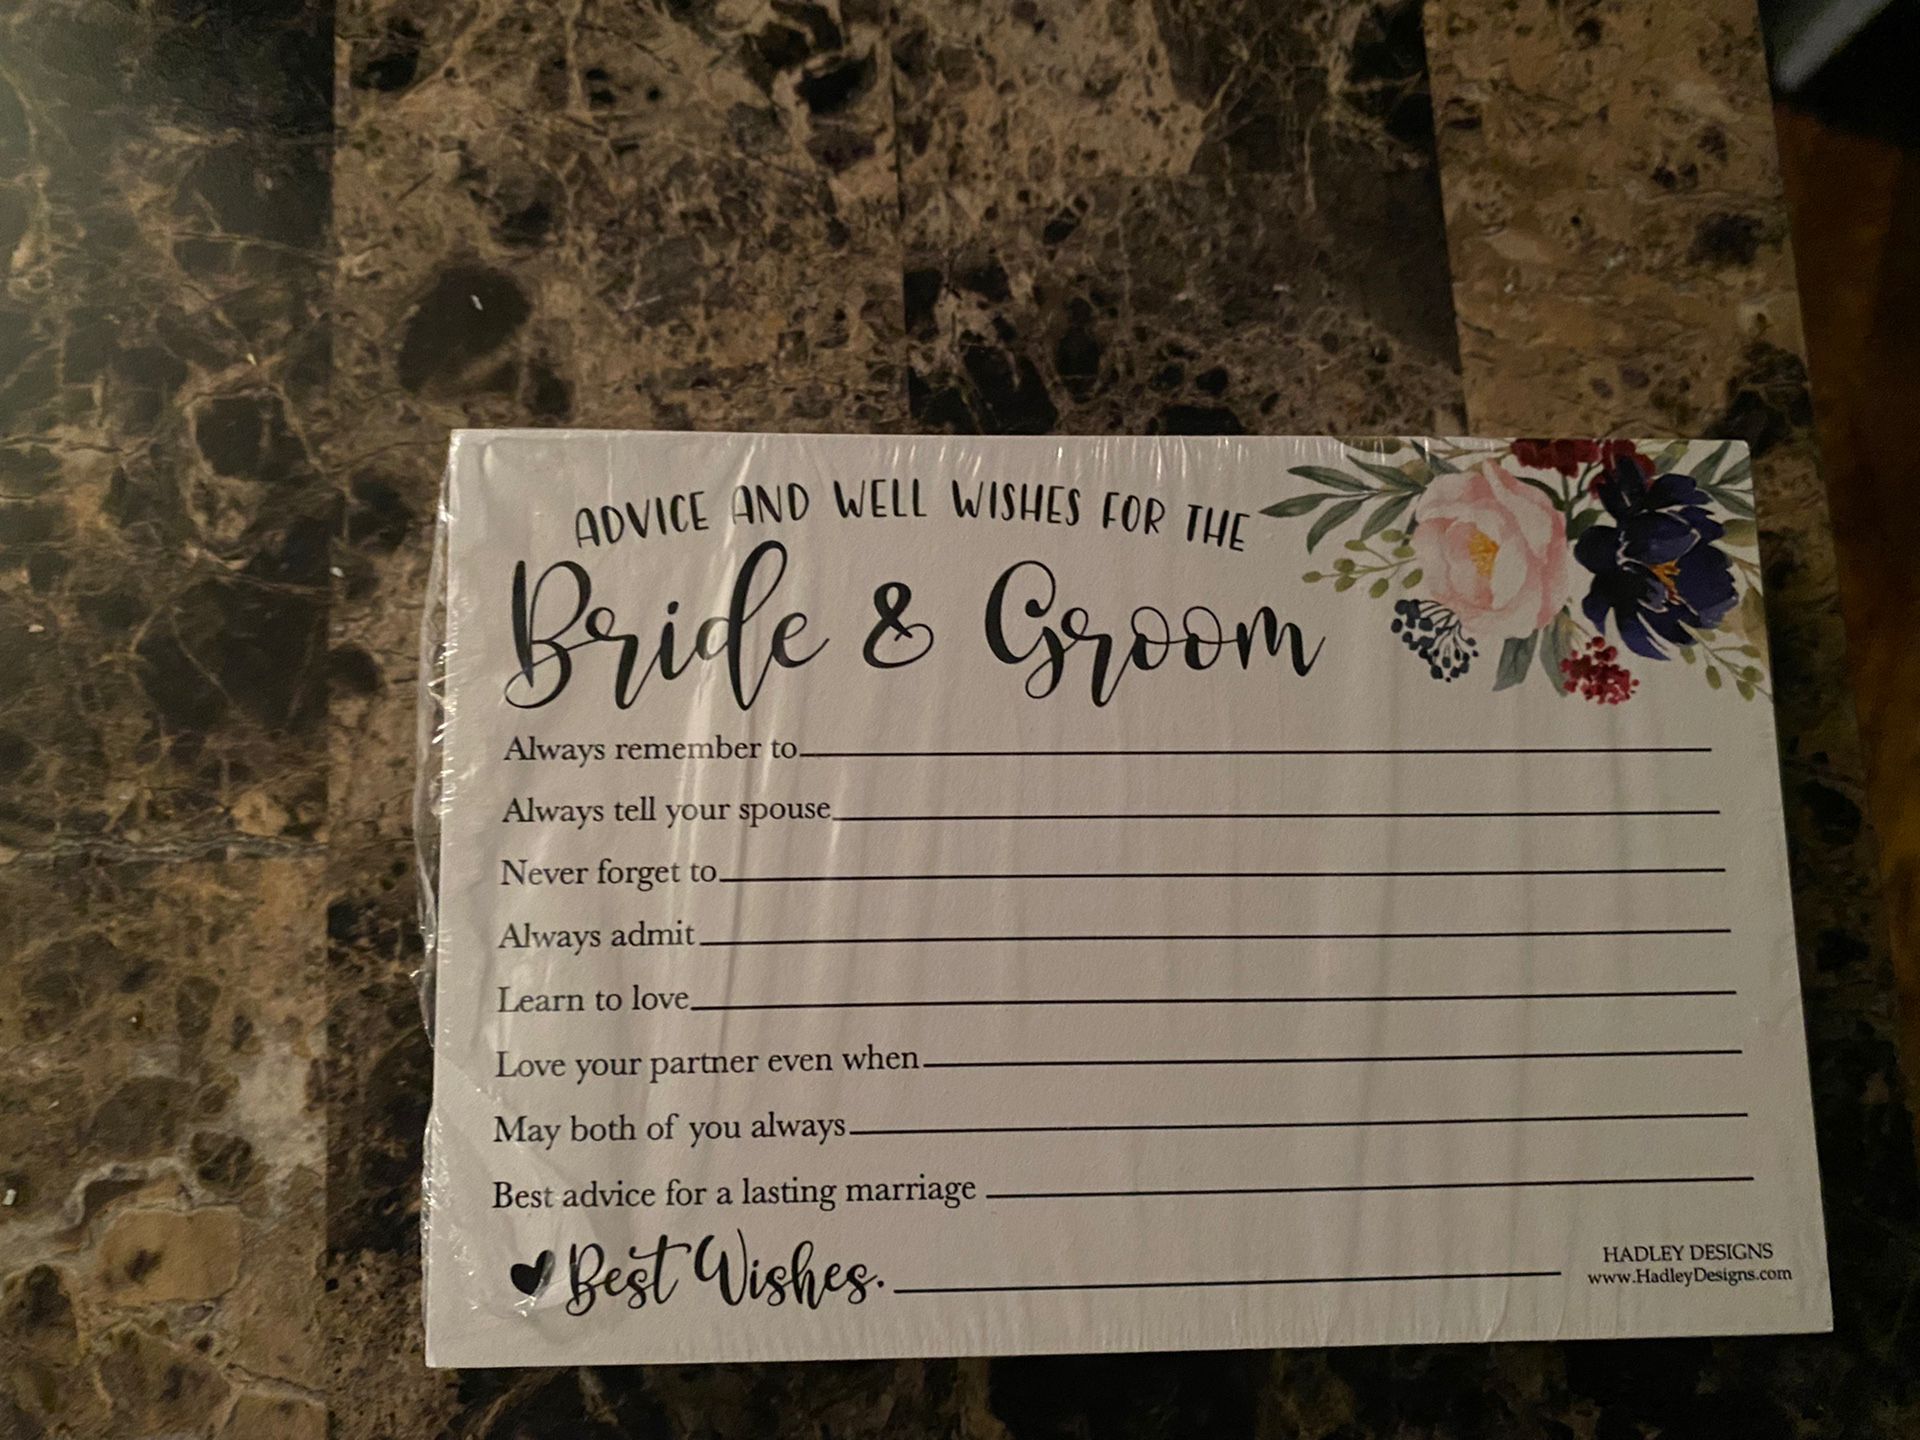 Bride And Groom Advice Cards - Wedding Well Wishes